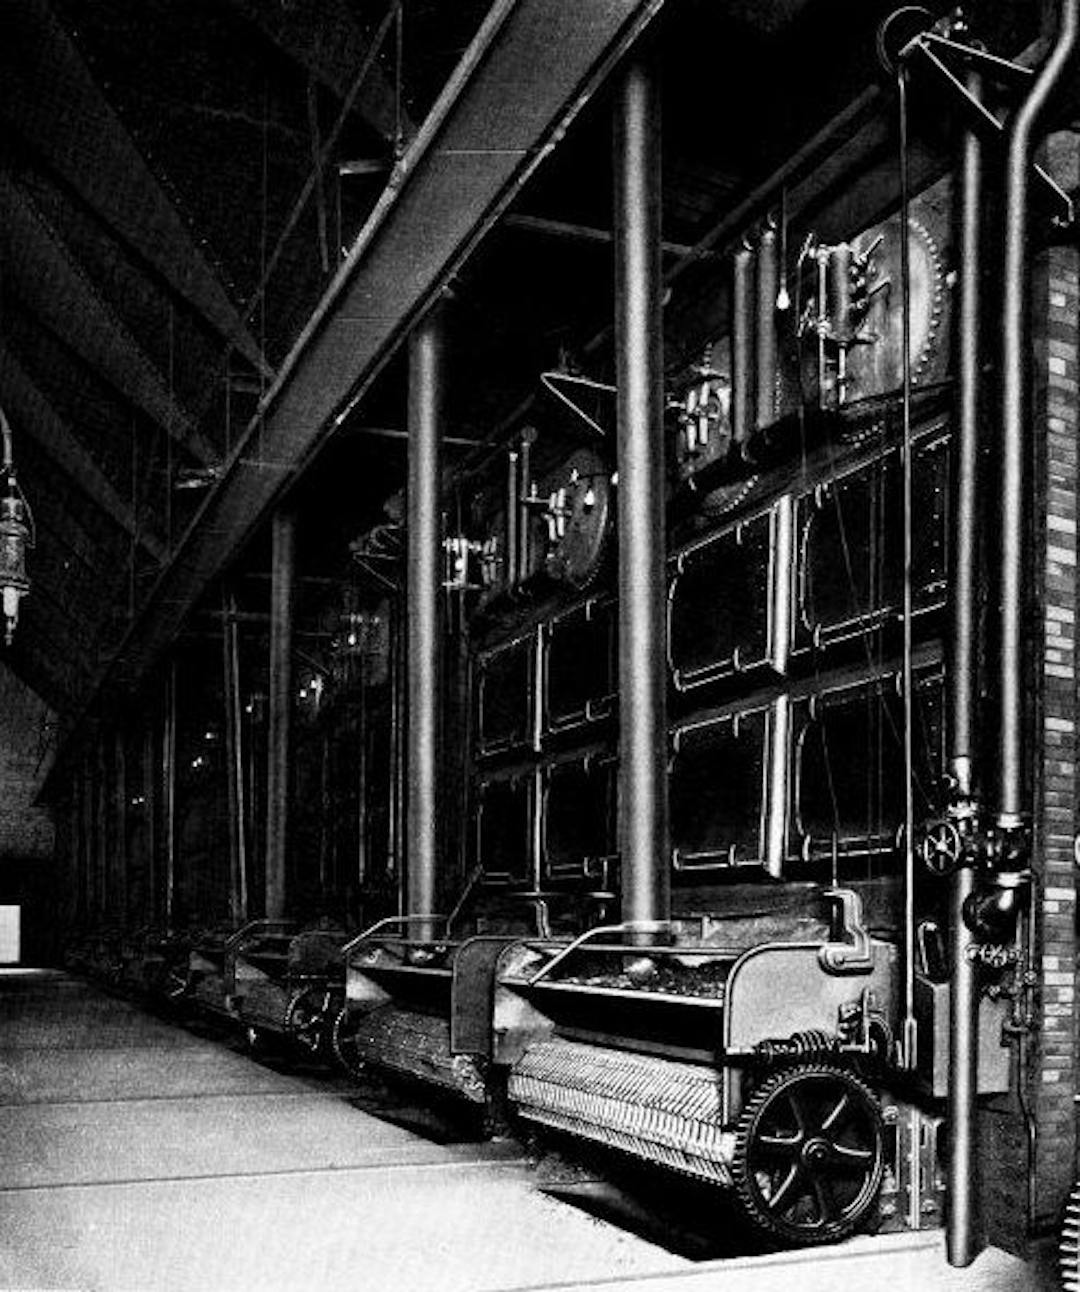 Portion of 9880 Horse-power Installation of Babcock & Wilcox Boilers and Superheaters, Equipped with Babcock & Wilcox Chain Grate Stokers at the South Side Elevated Ry. Co., Chicago, Ill.